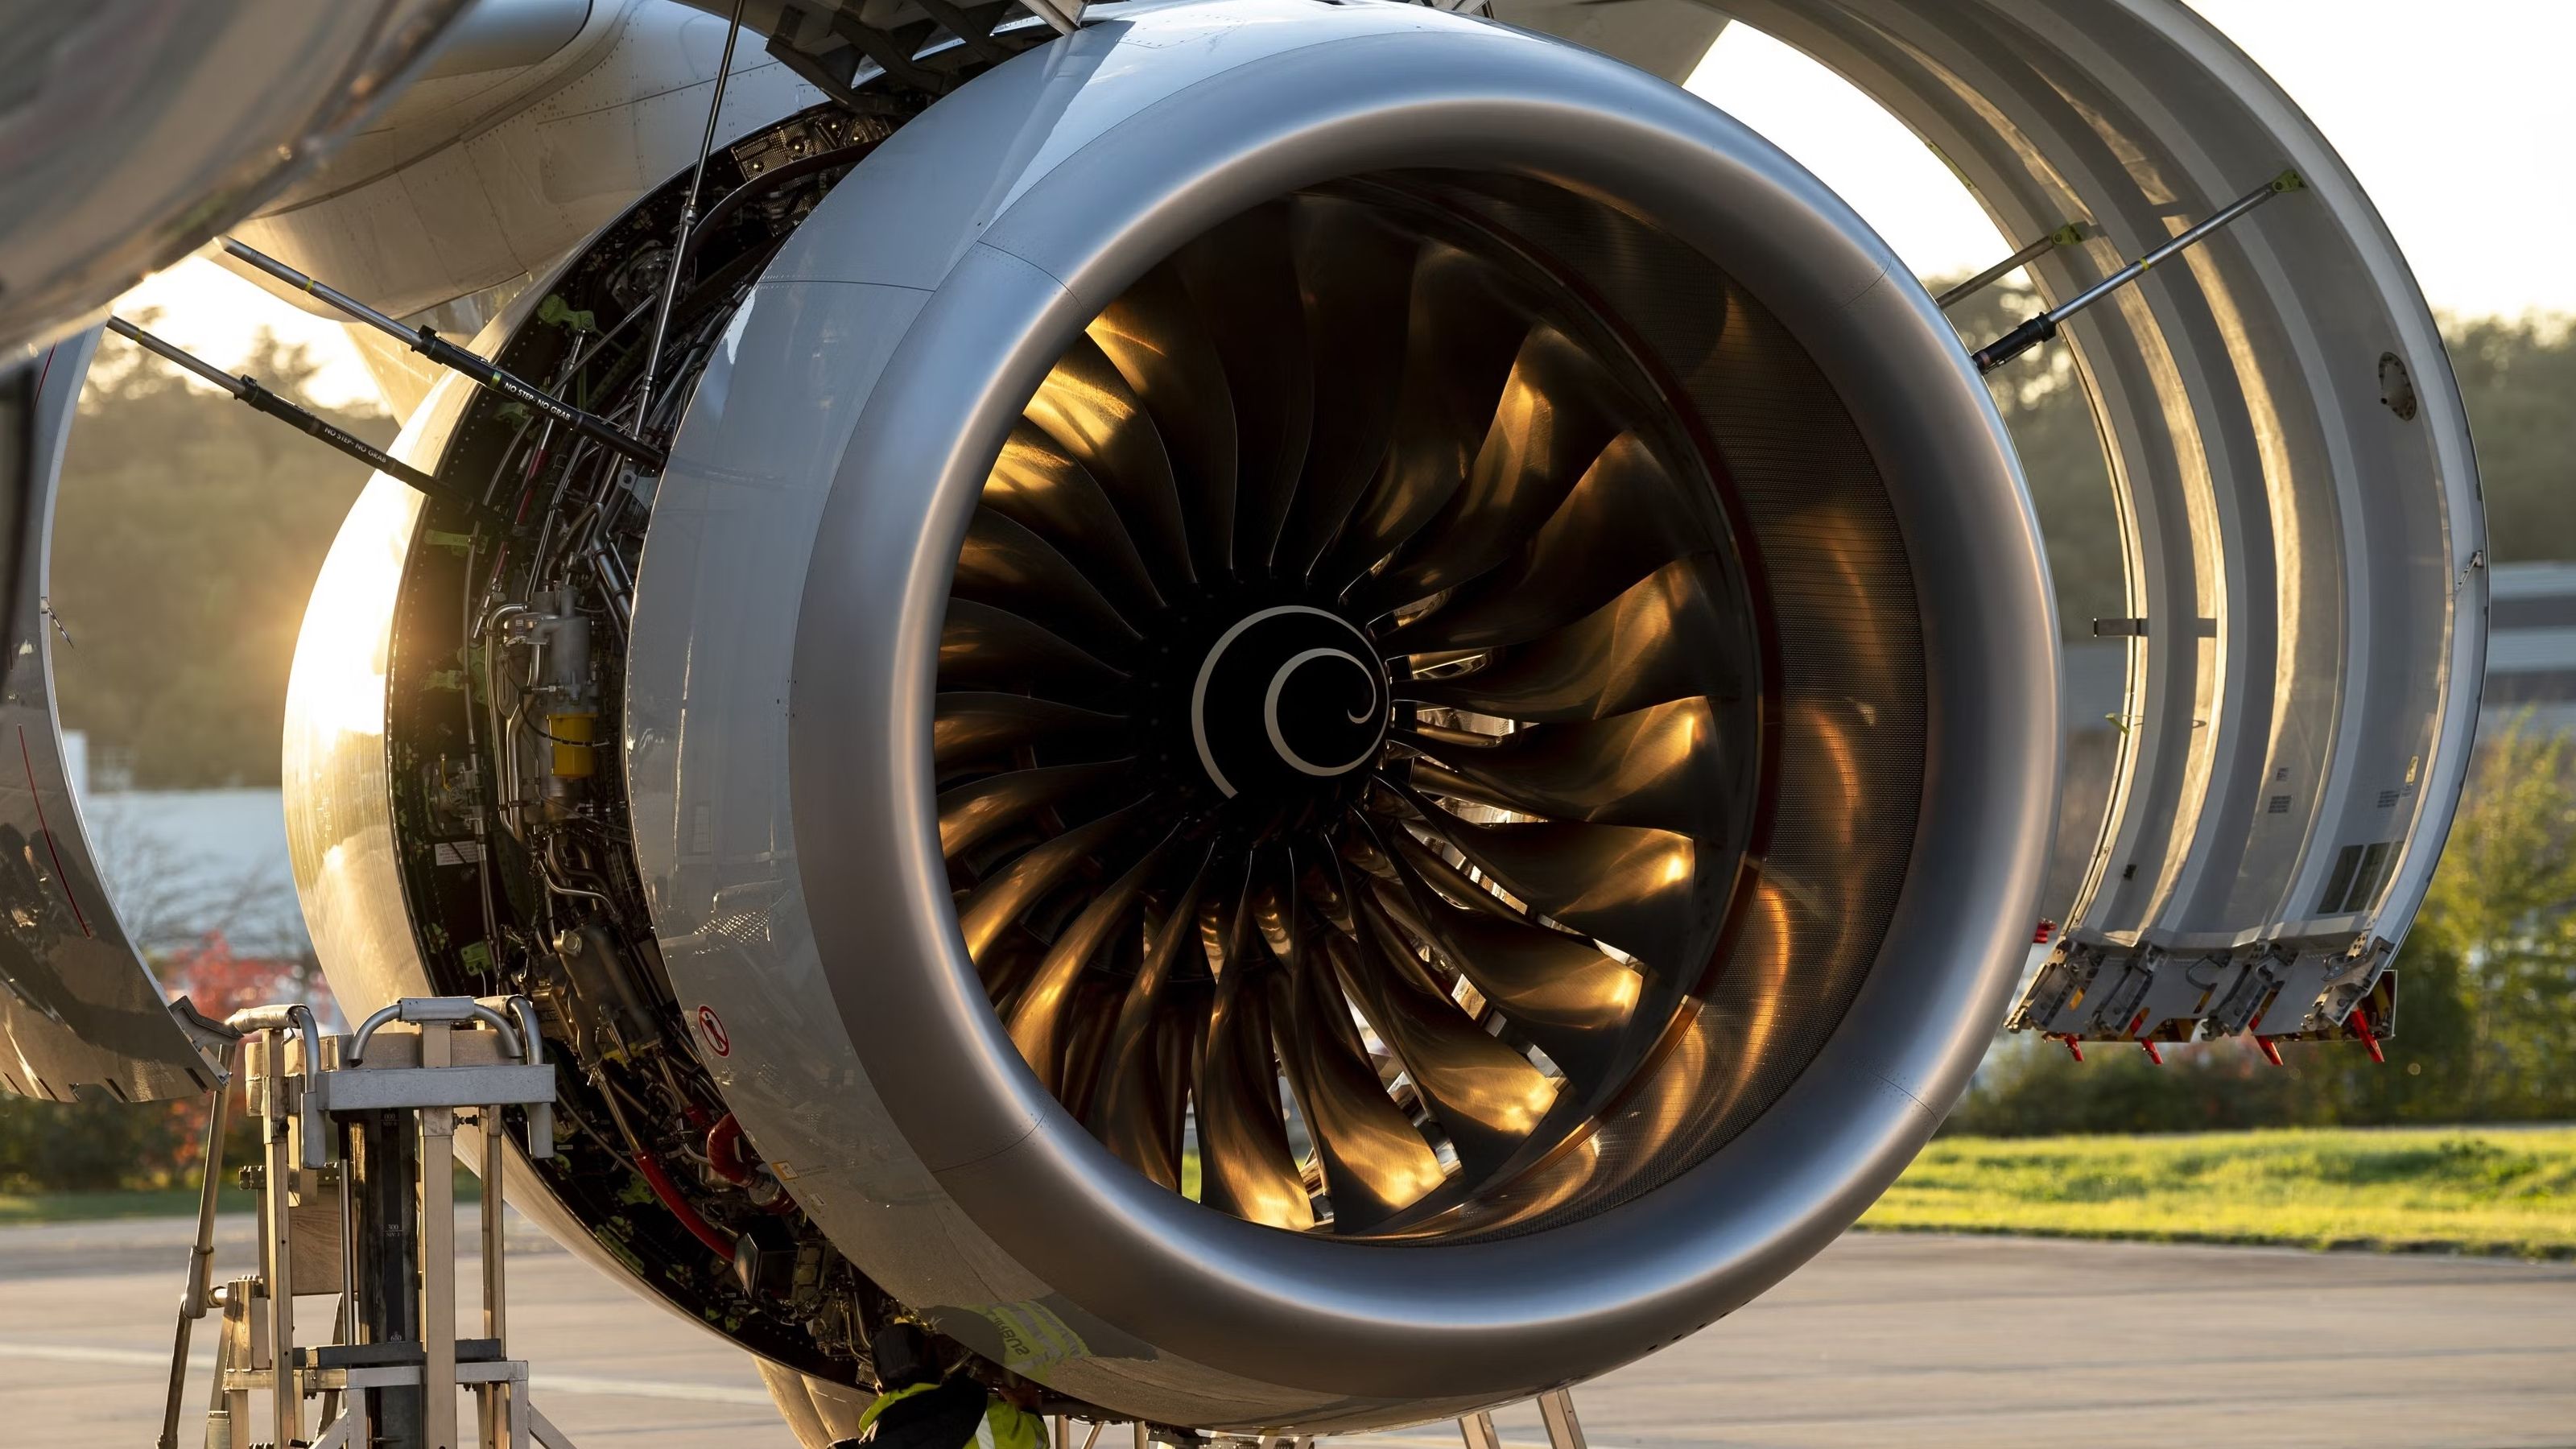 An Airbus A350-900 engine with its cowlings off.